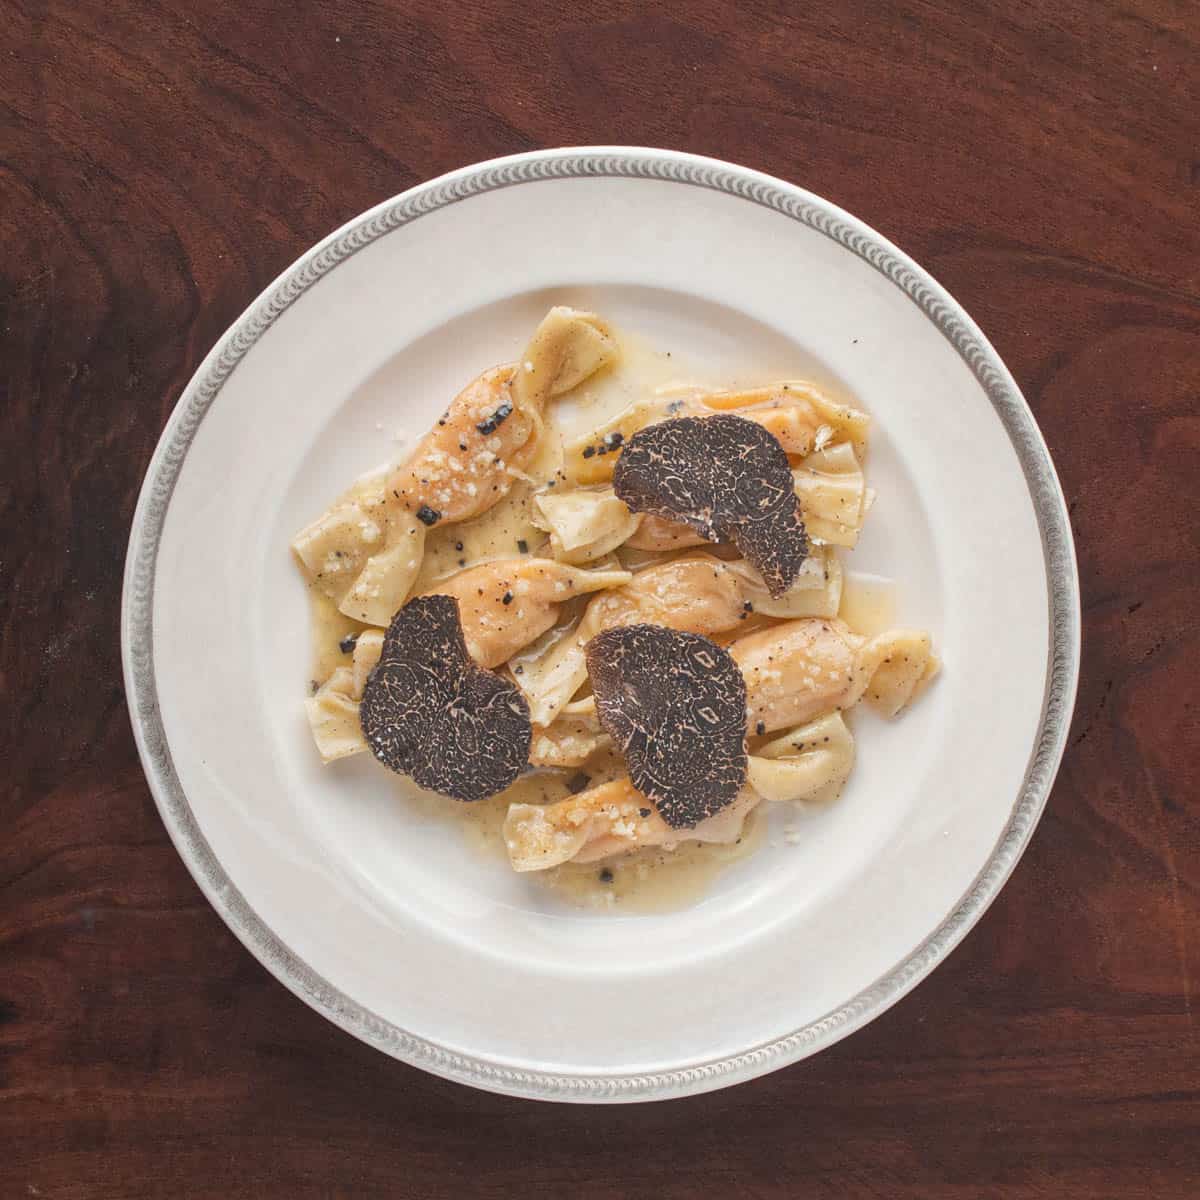 a plate of squash caramelle pasta with truffle butter sauce.